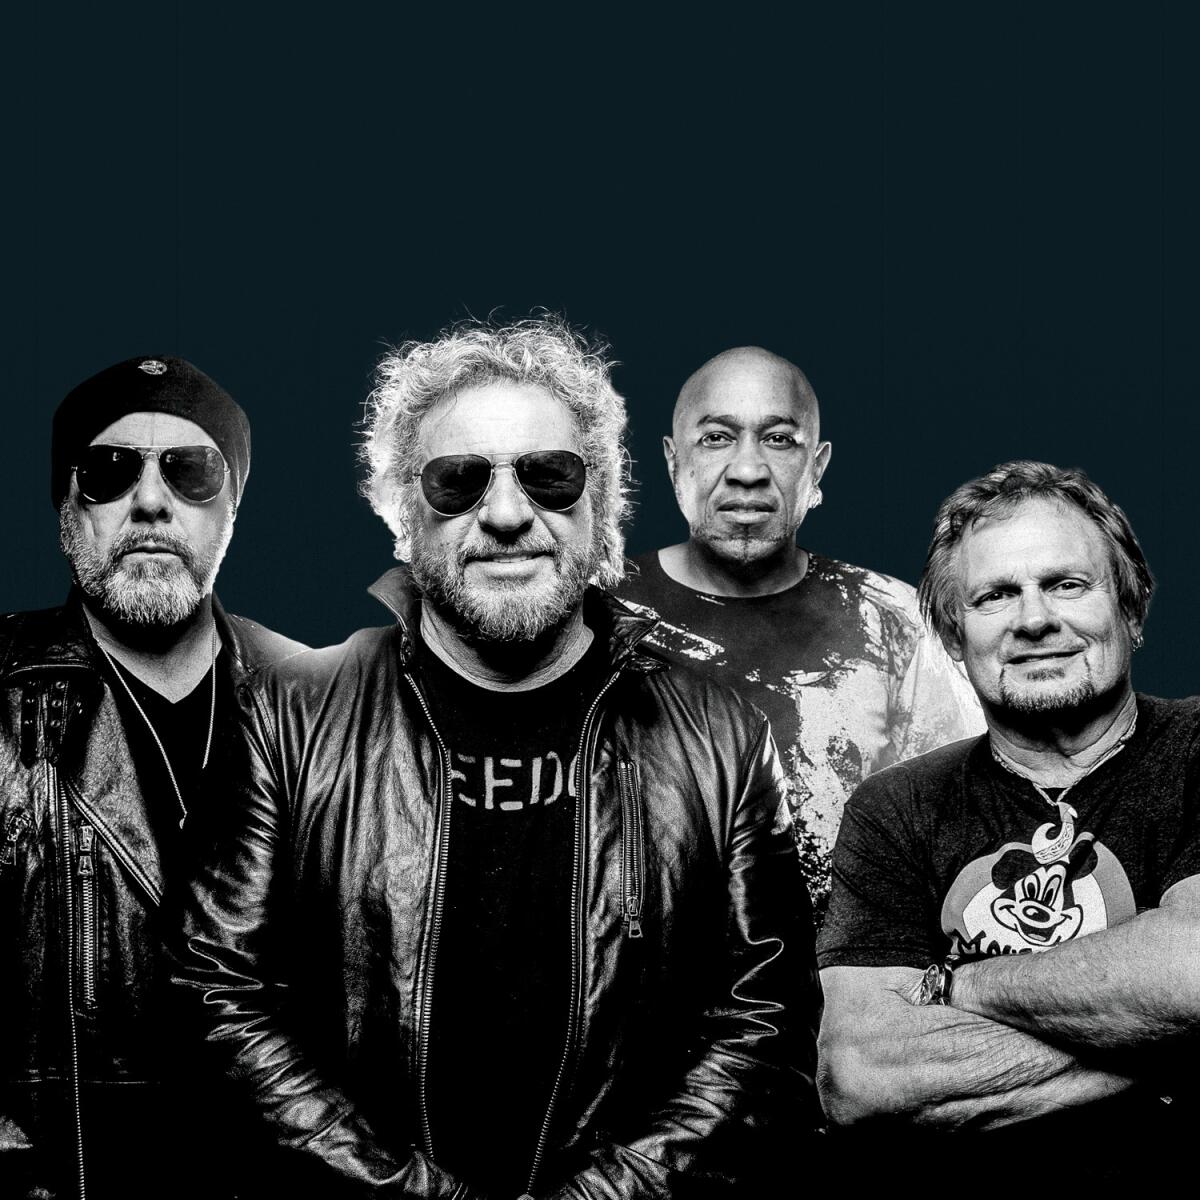 Sammy Hagar, second from left, and his band the Circle will be playing at Huntington City Beach on Oct. 1 